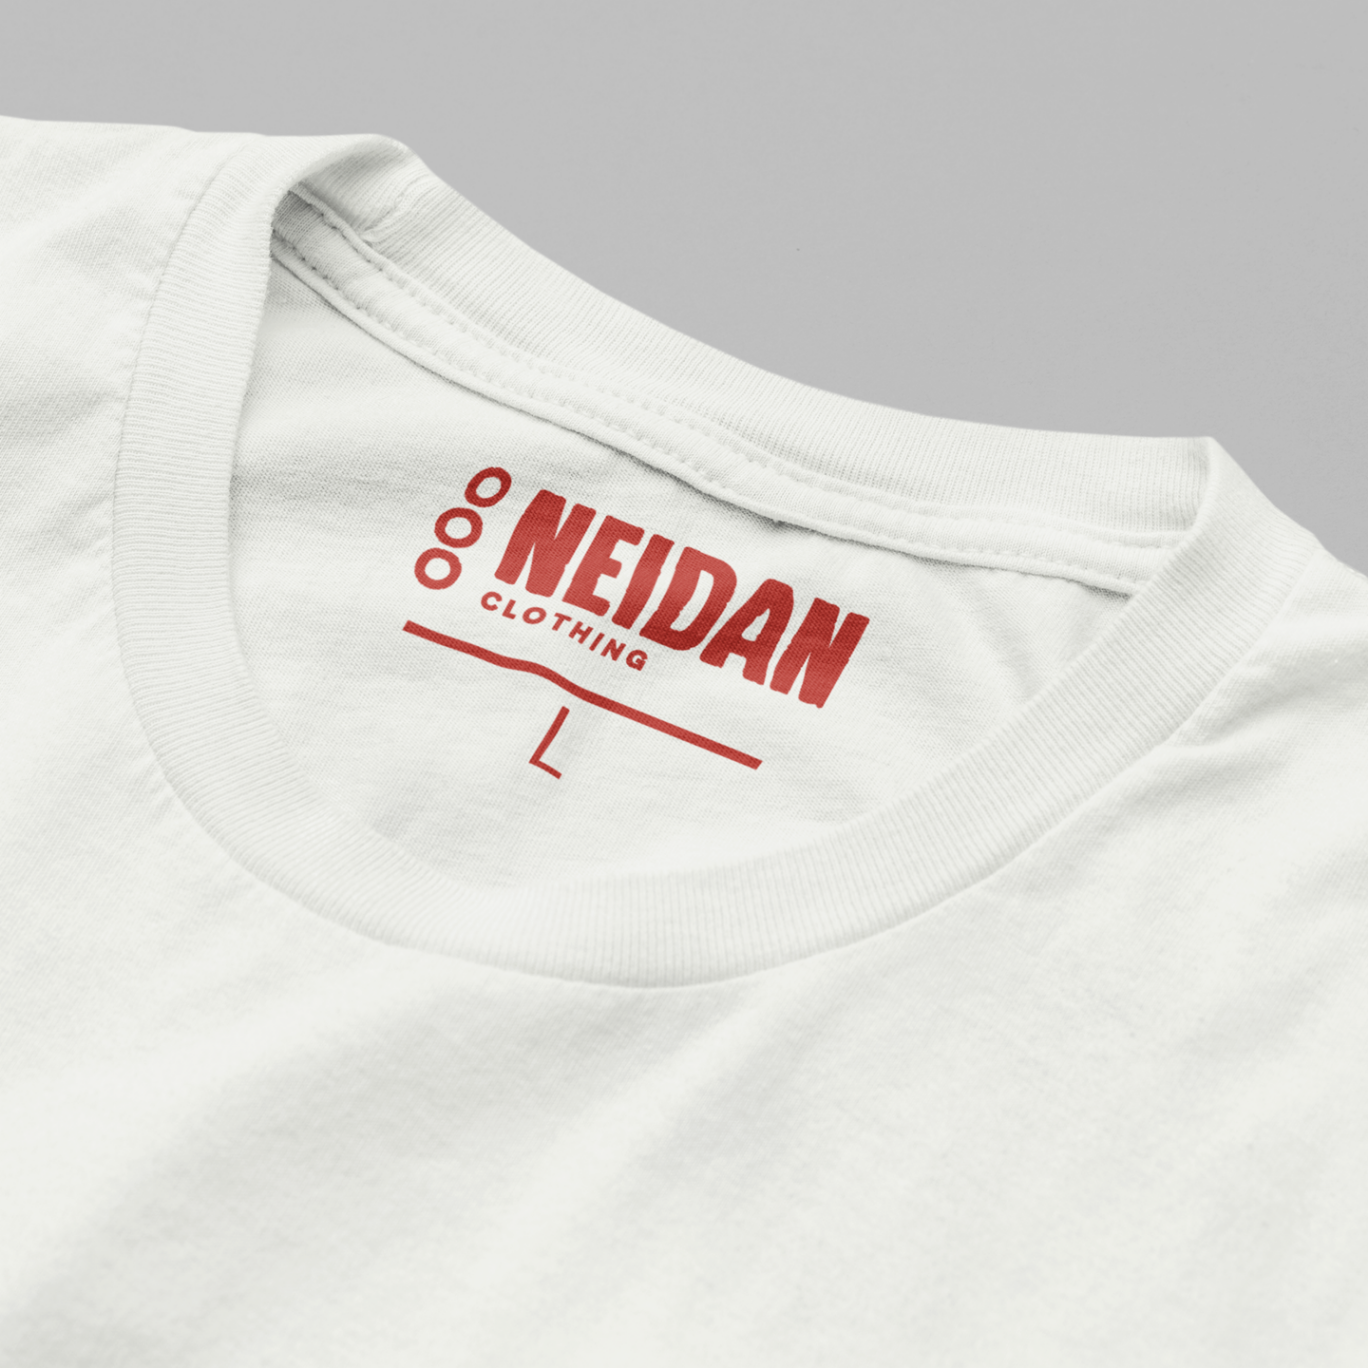 Closeup of a white t shirt neck label with neidan clothing logo